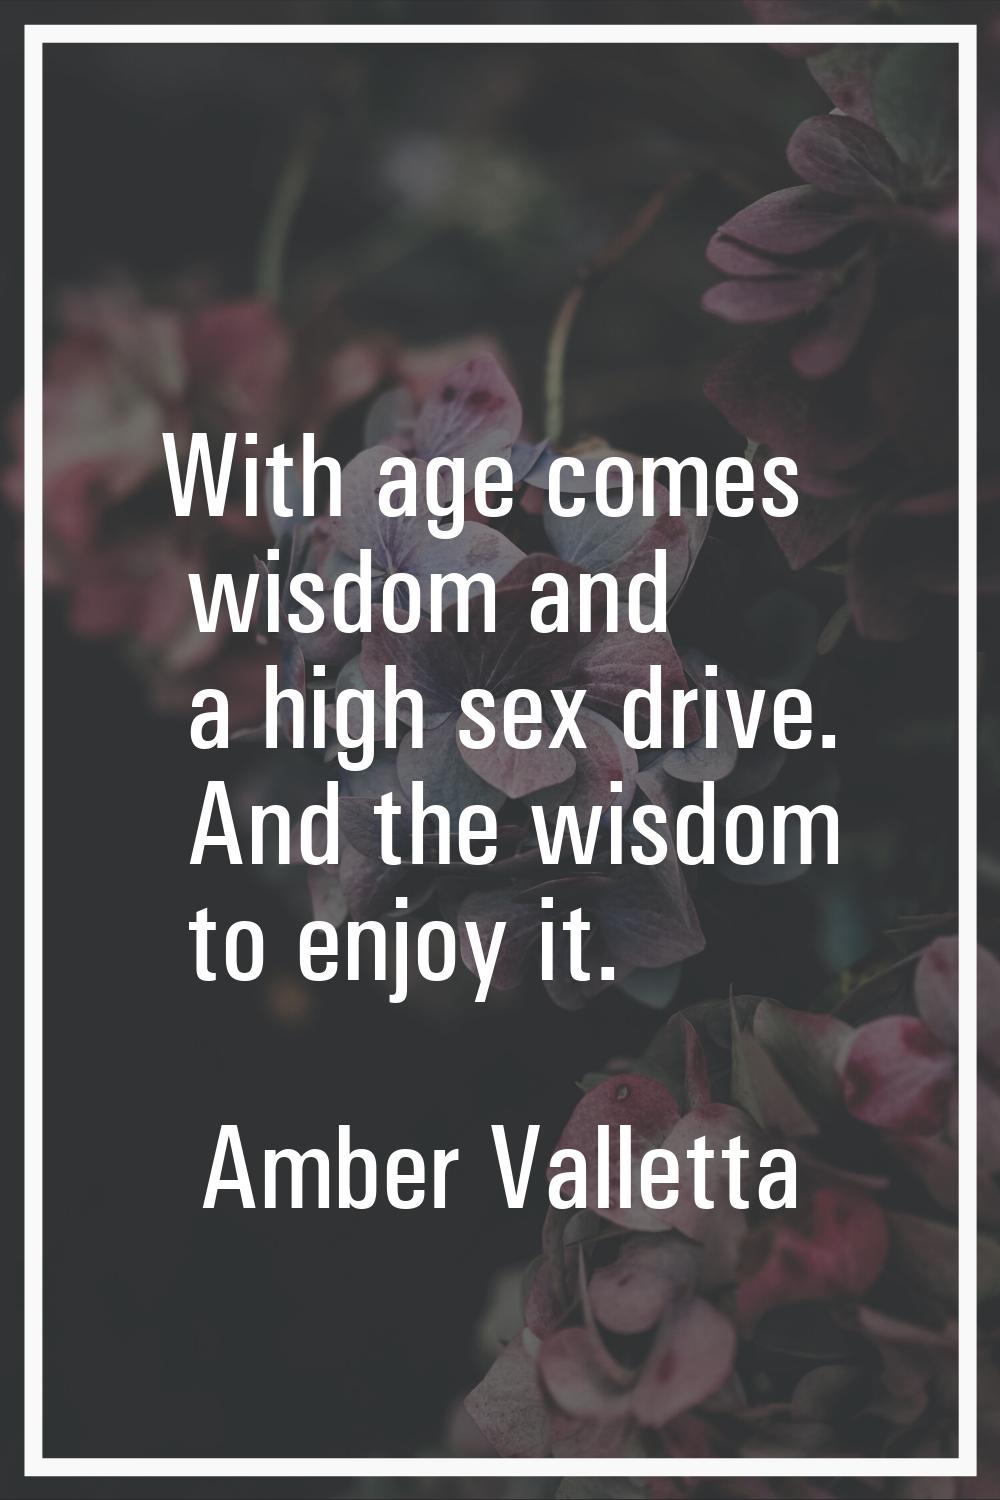 With age comes wisdom and a high sex drive. And the wisdom to enjoy it.